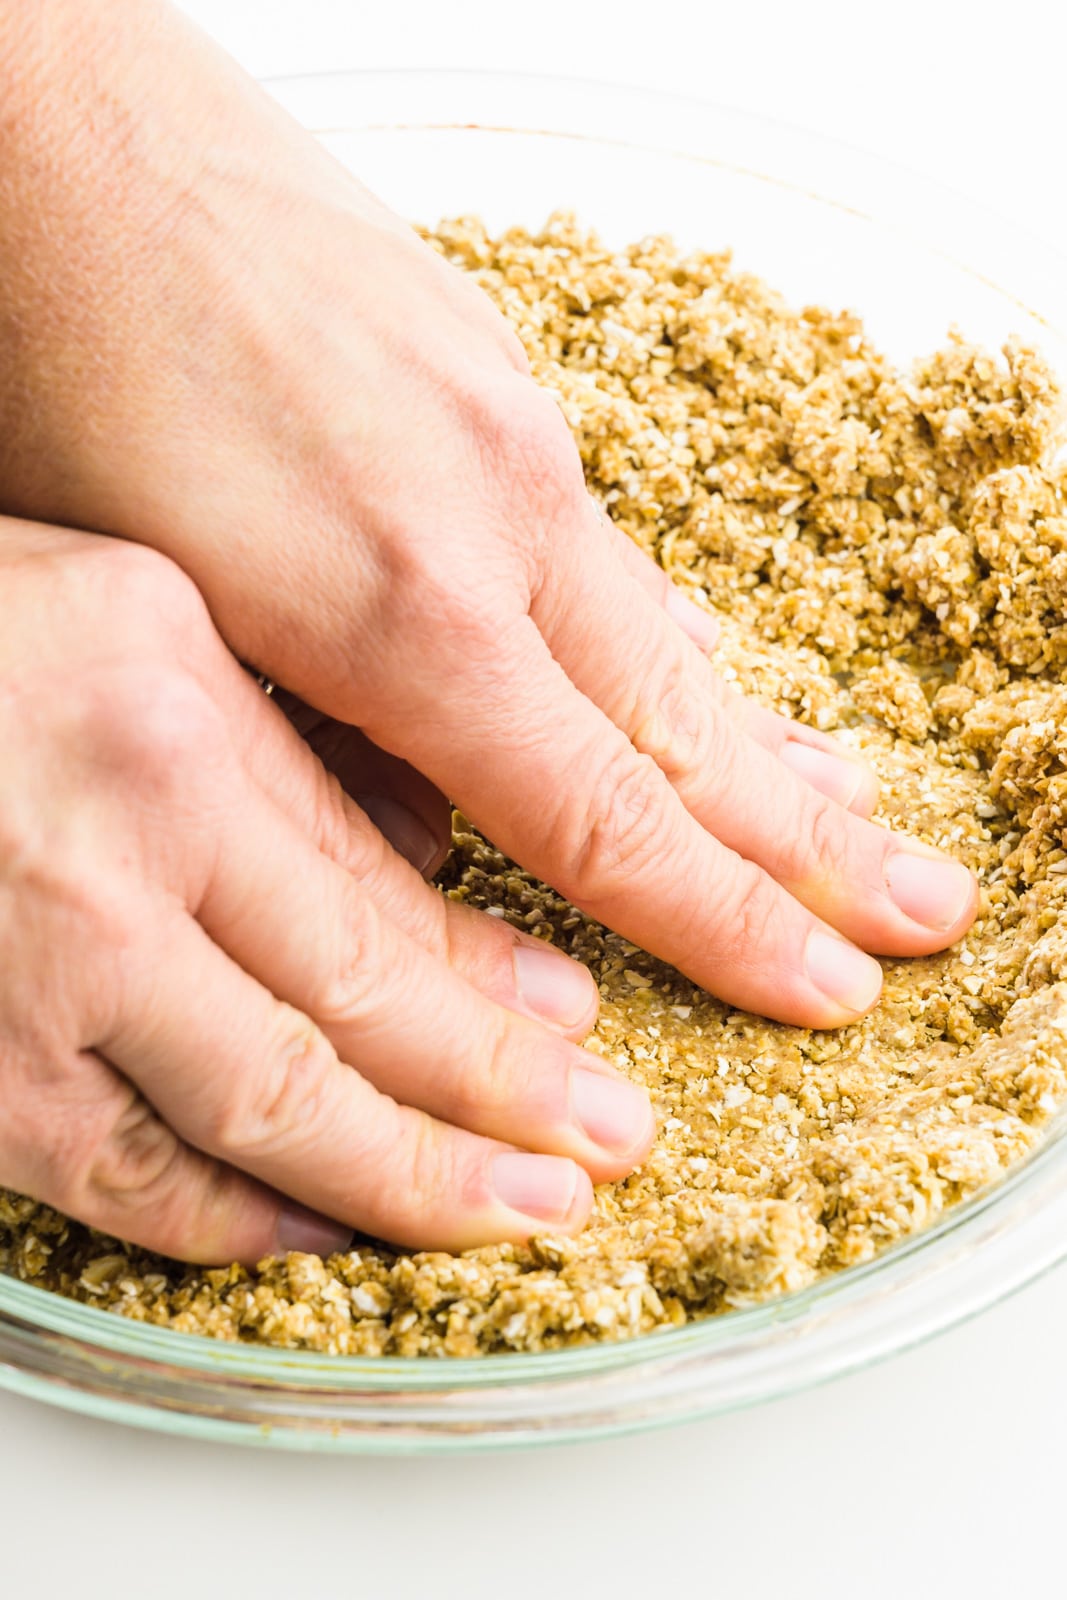 Hands are pressing an oatmeal mixture into a pie pan.